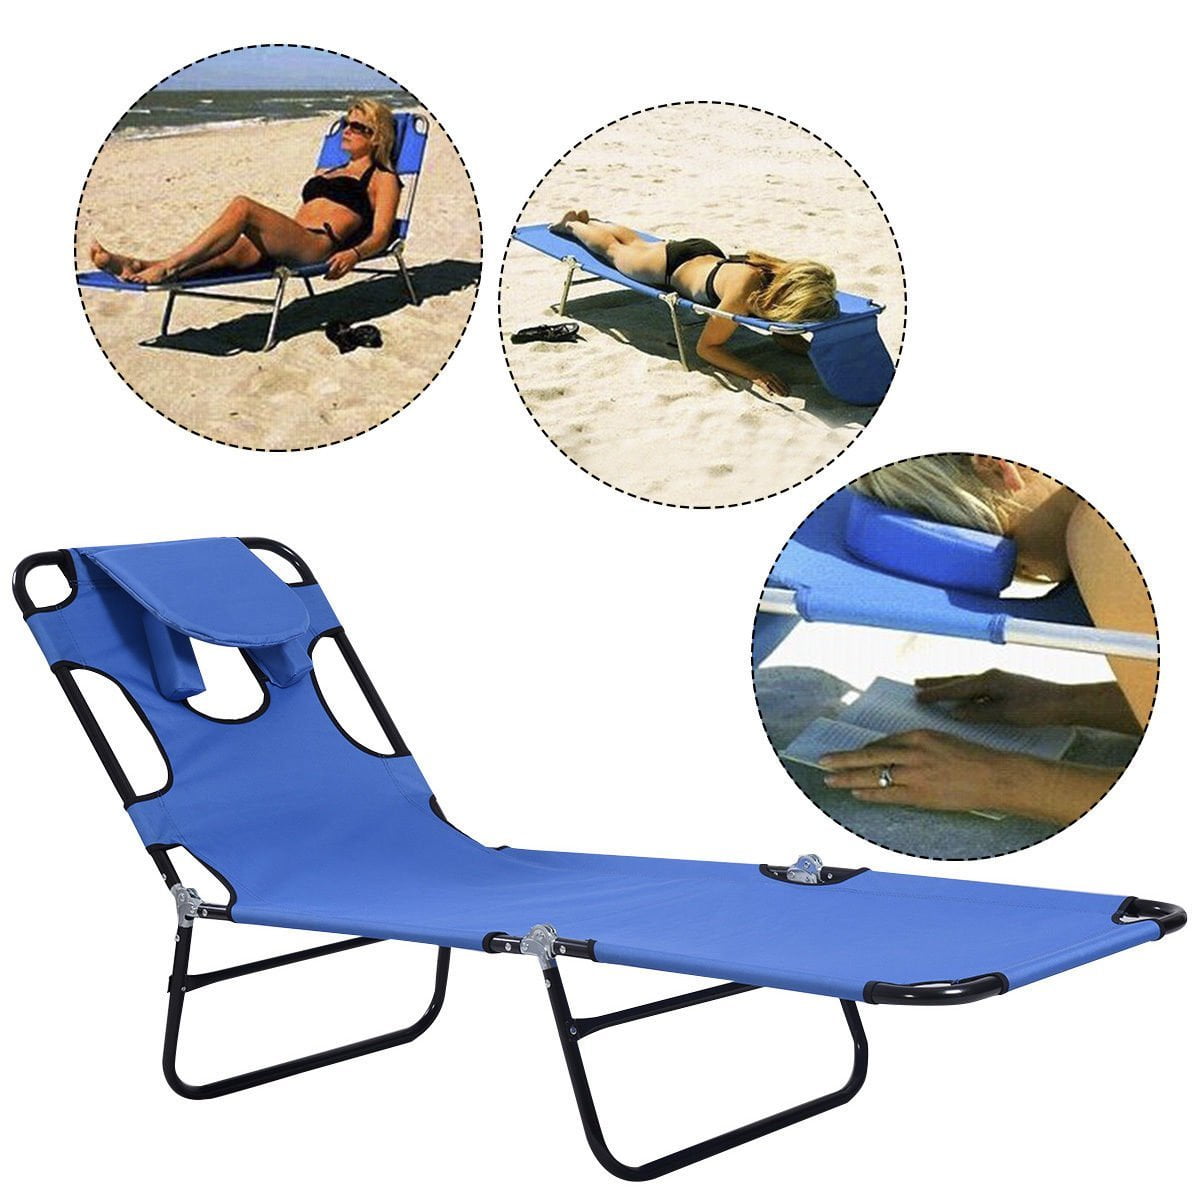 Portable Folding Camping Bed lounger Army Outdoor Sleeping Hiking Travel Adjusta 